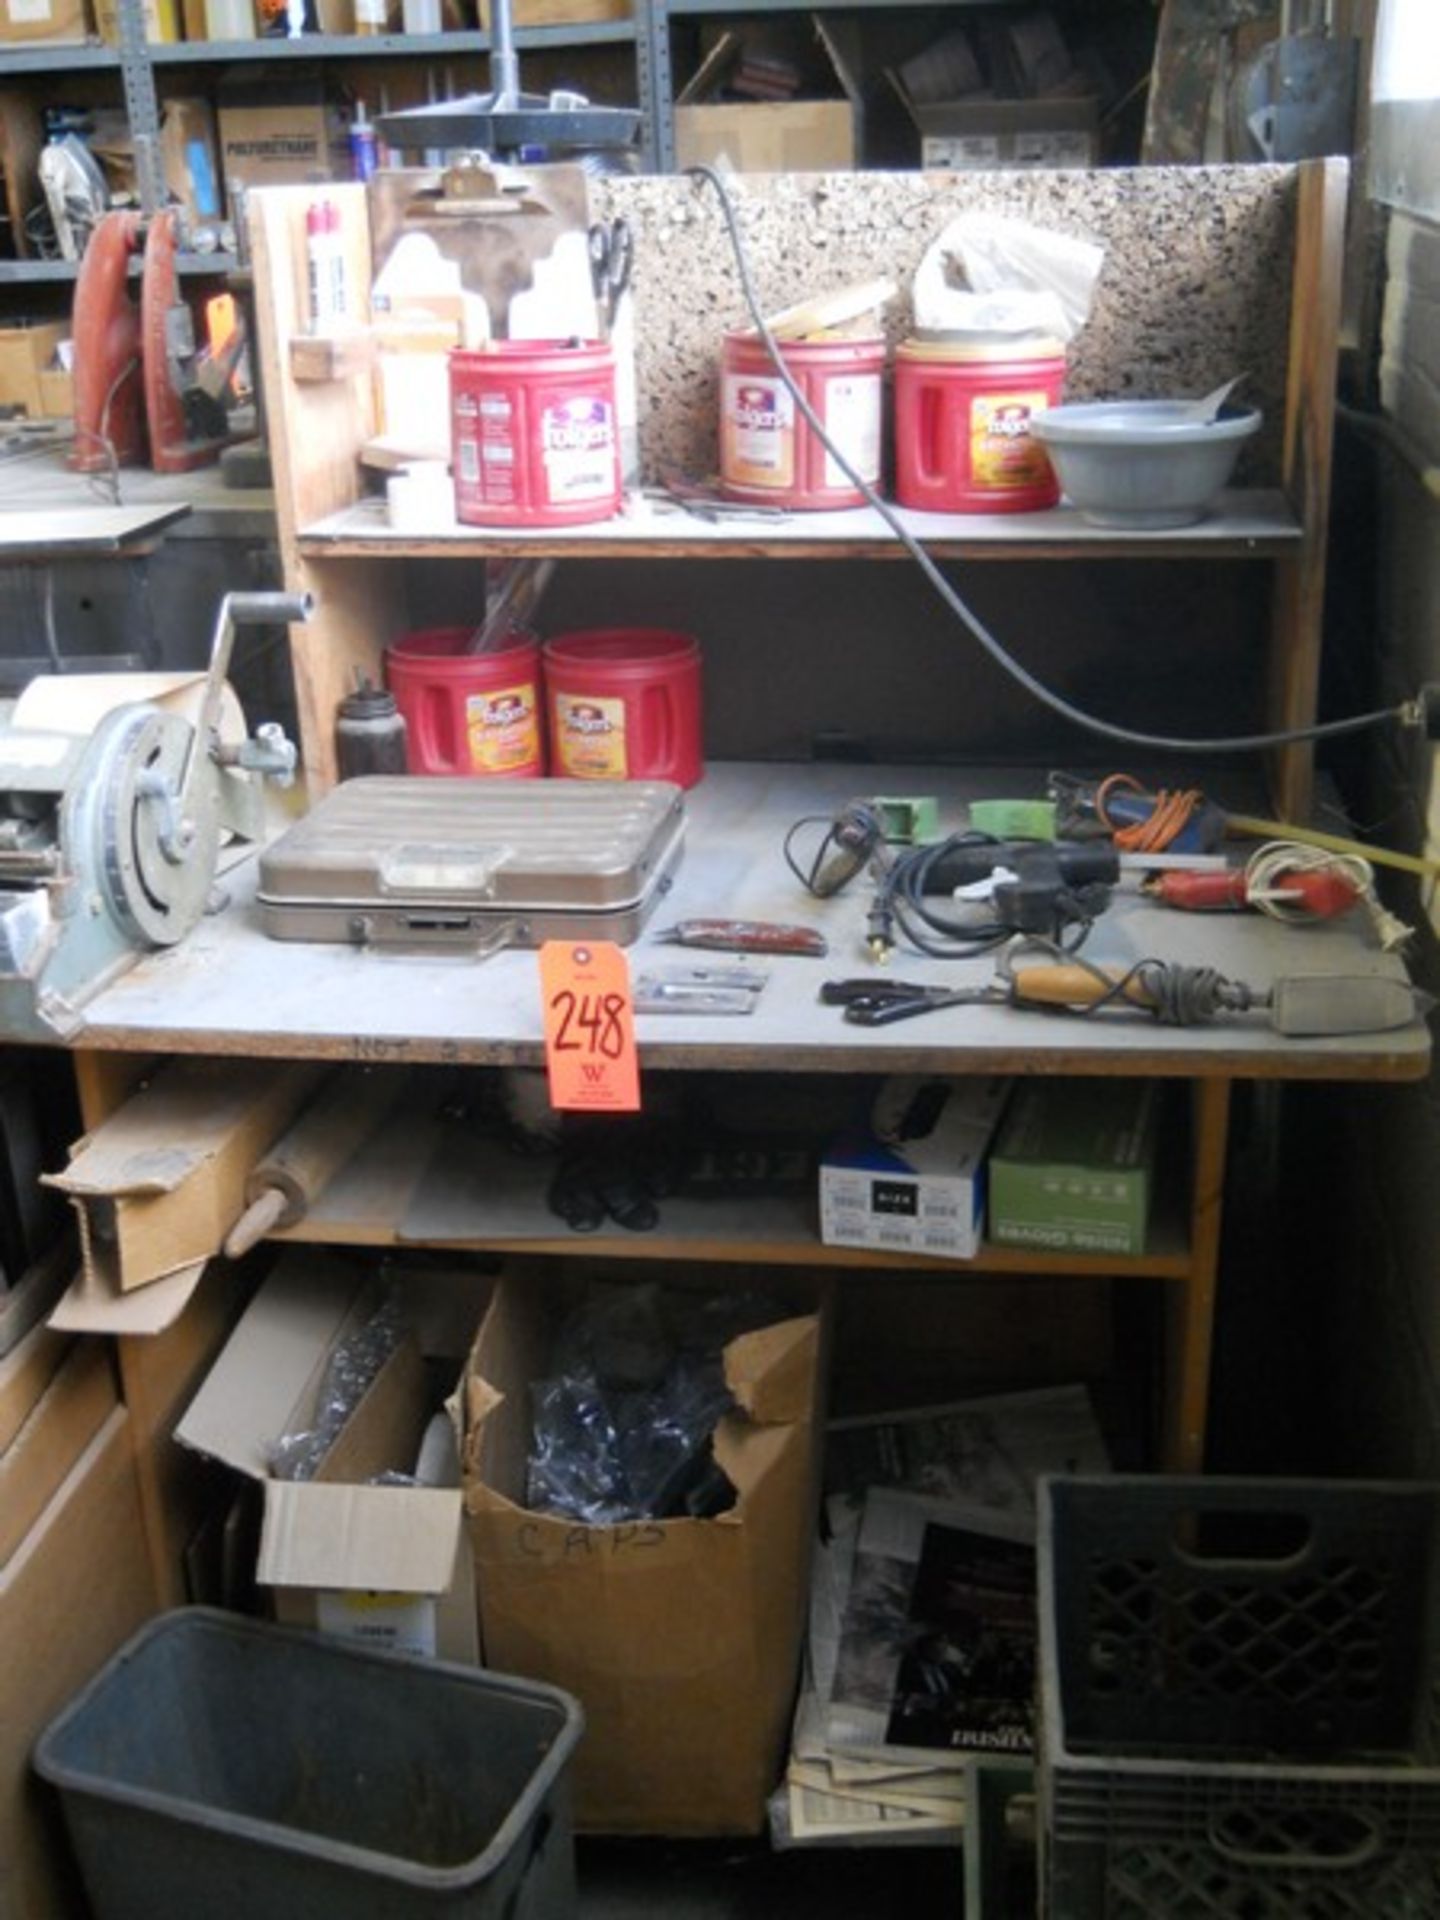 Lot - Shipping & Receiving Department, Including: Scale; Tape Dispenser; Glue Guns; Hand Held Iron - Image 2 of 7